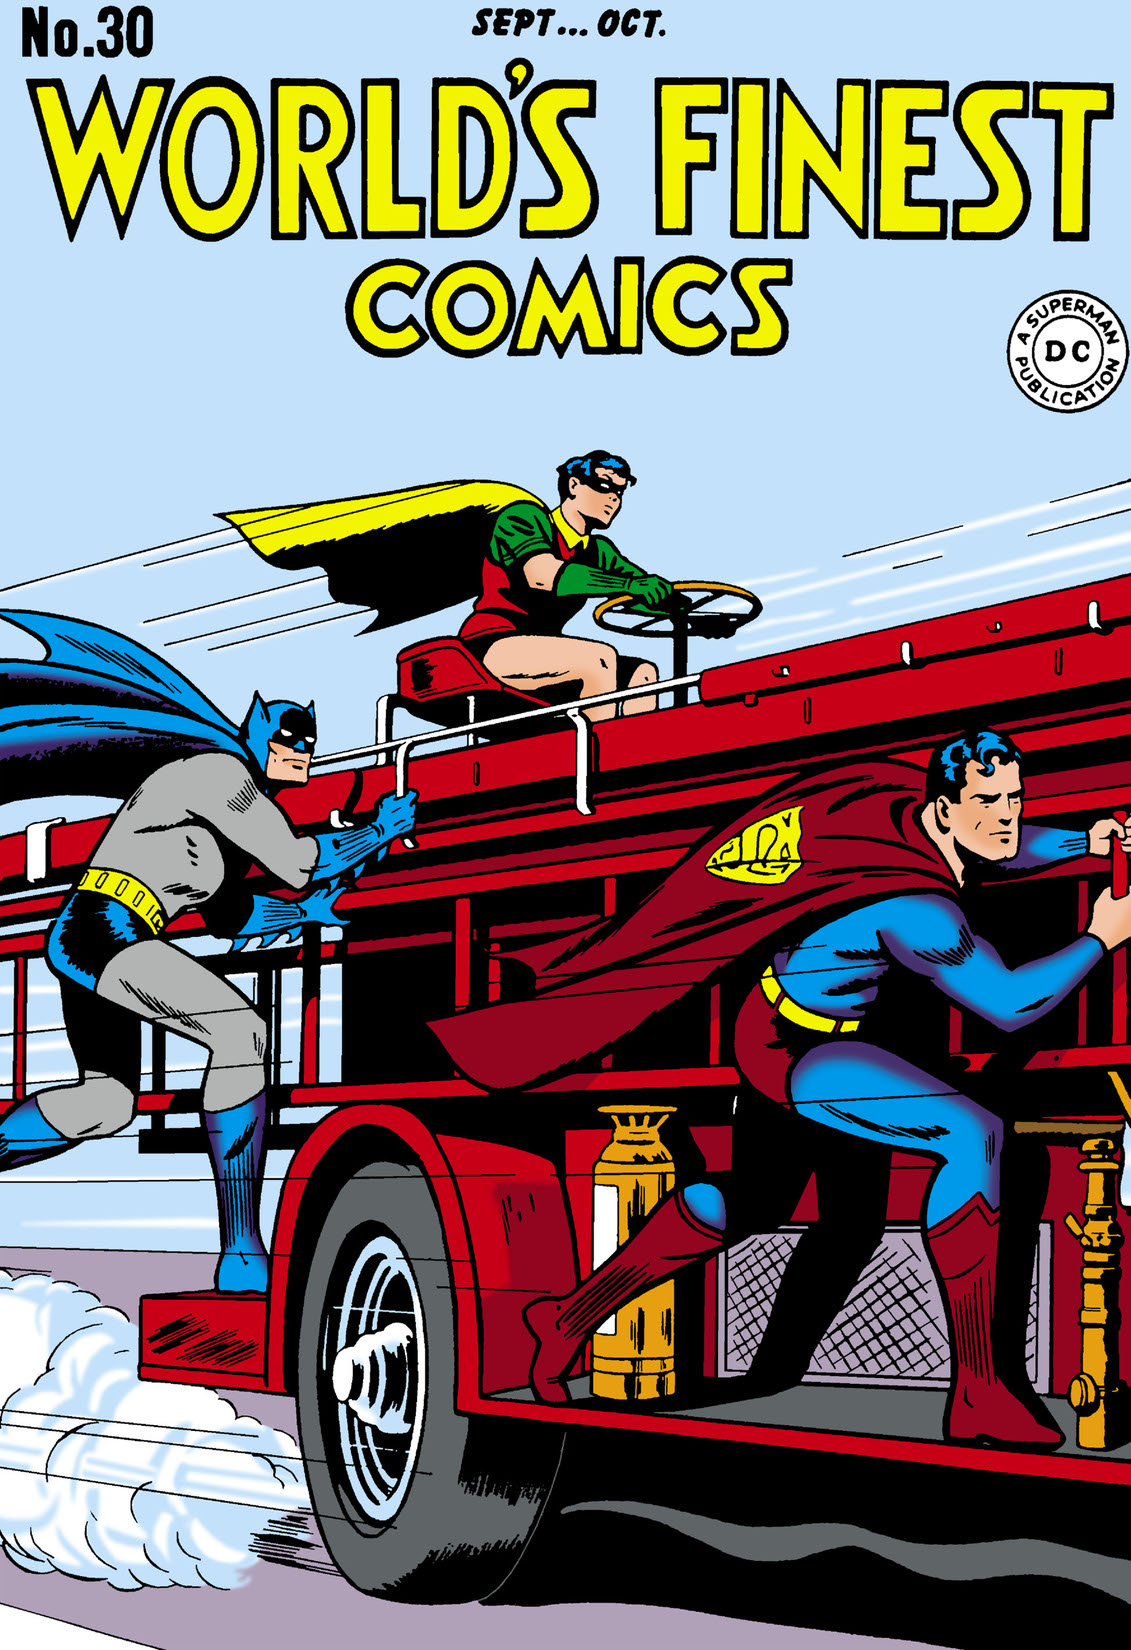 World's Finest Comics (1941-) #30 preview images